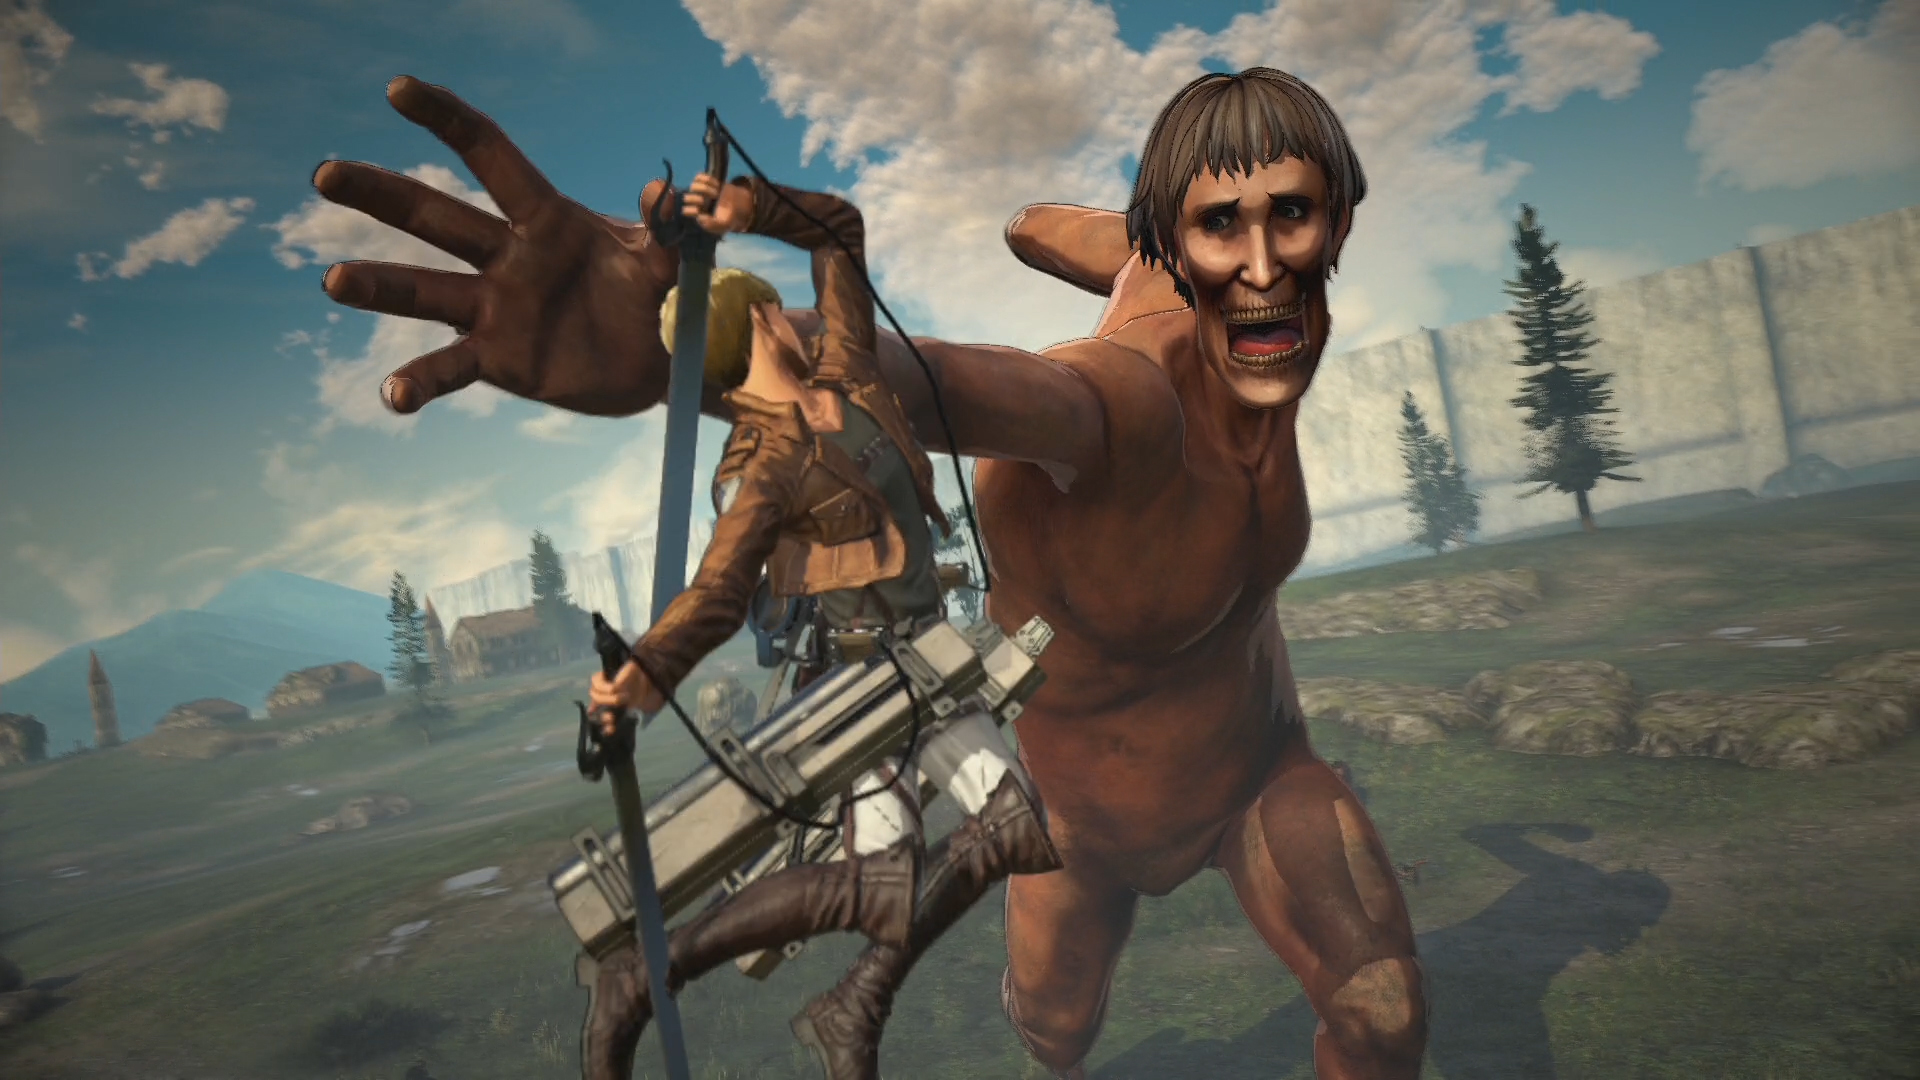 Attack on Titan 2 Review